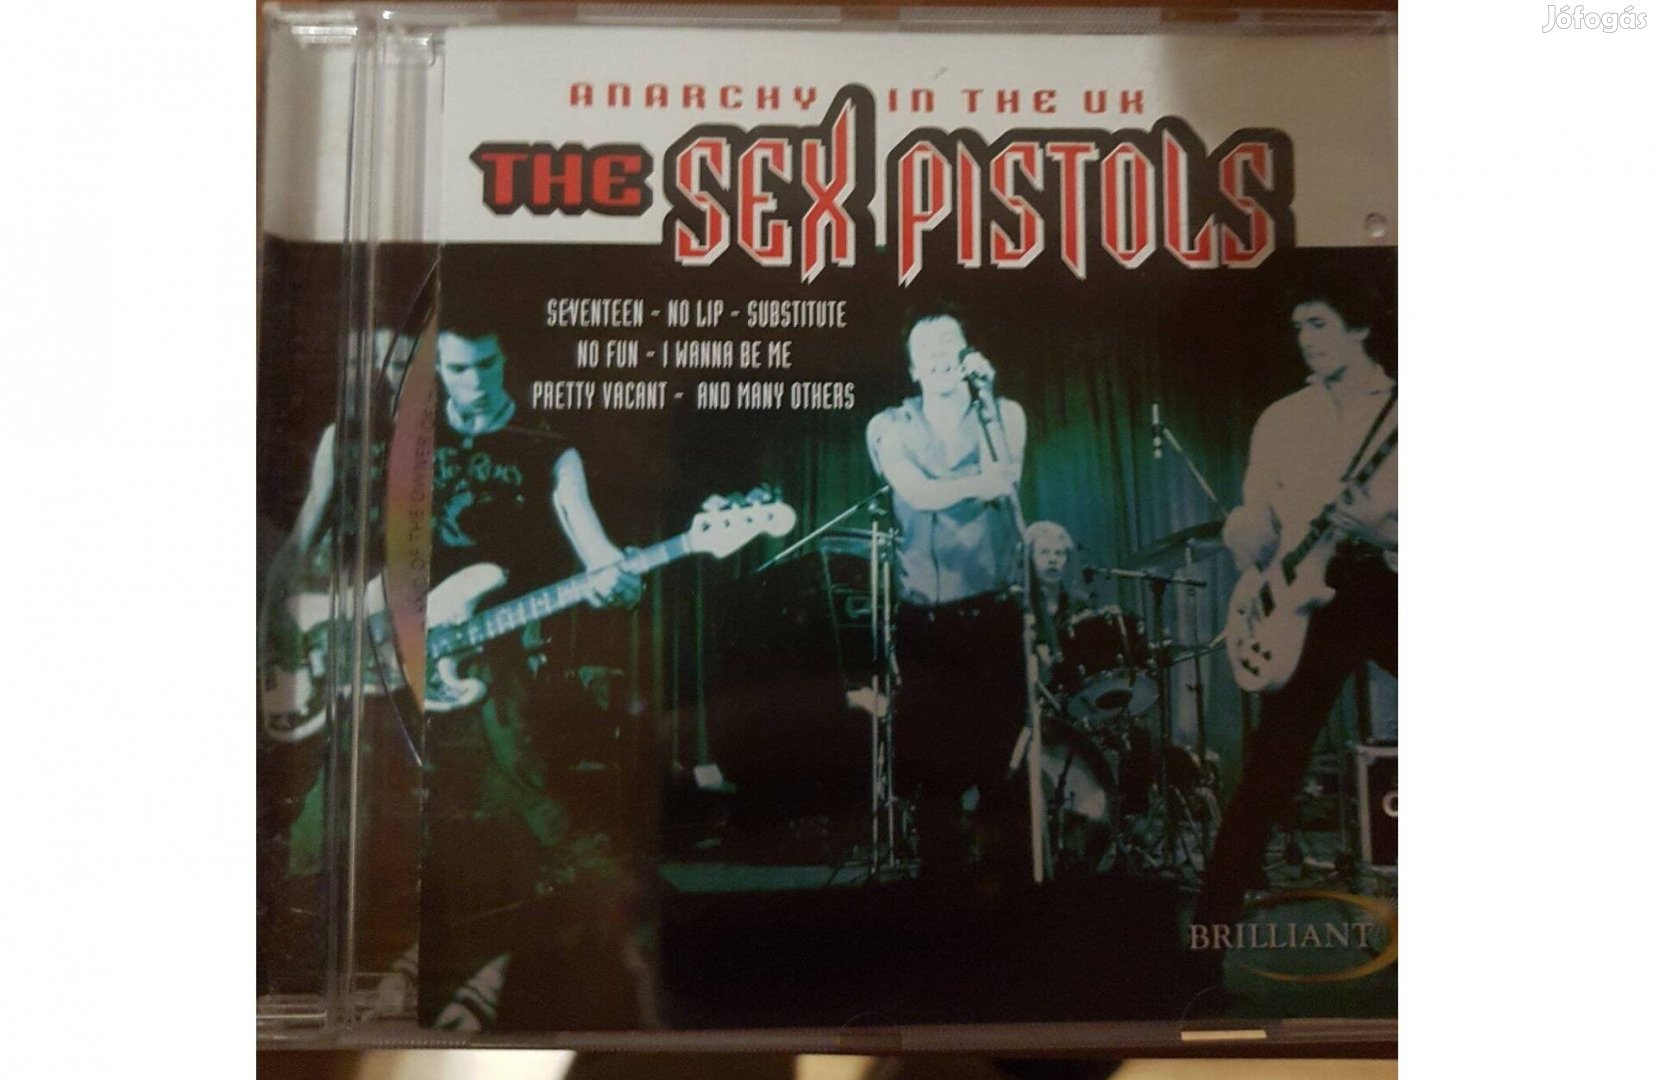 The Sex Pistols - Anarchy In The UK CD